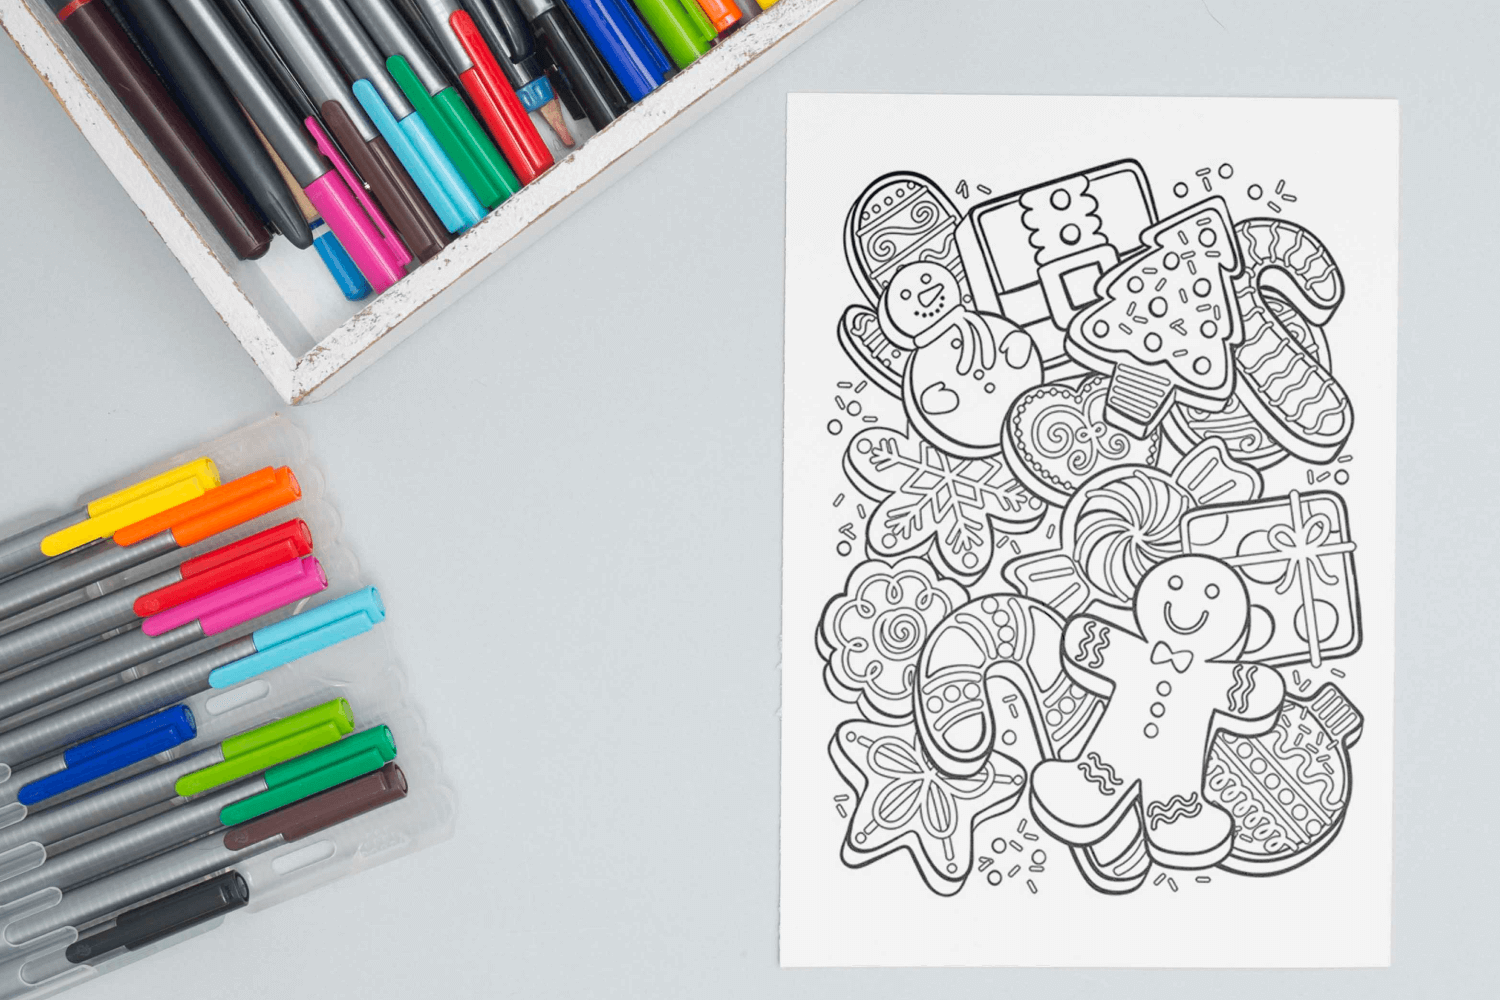 Christmas Cookies Coloring Pages - 25 FREE Pages